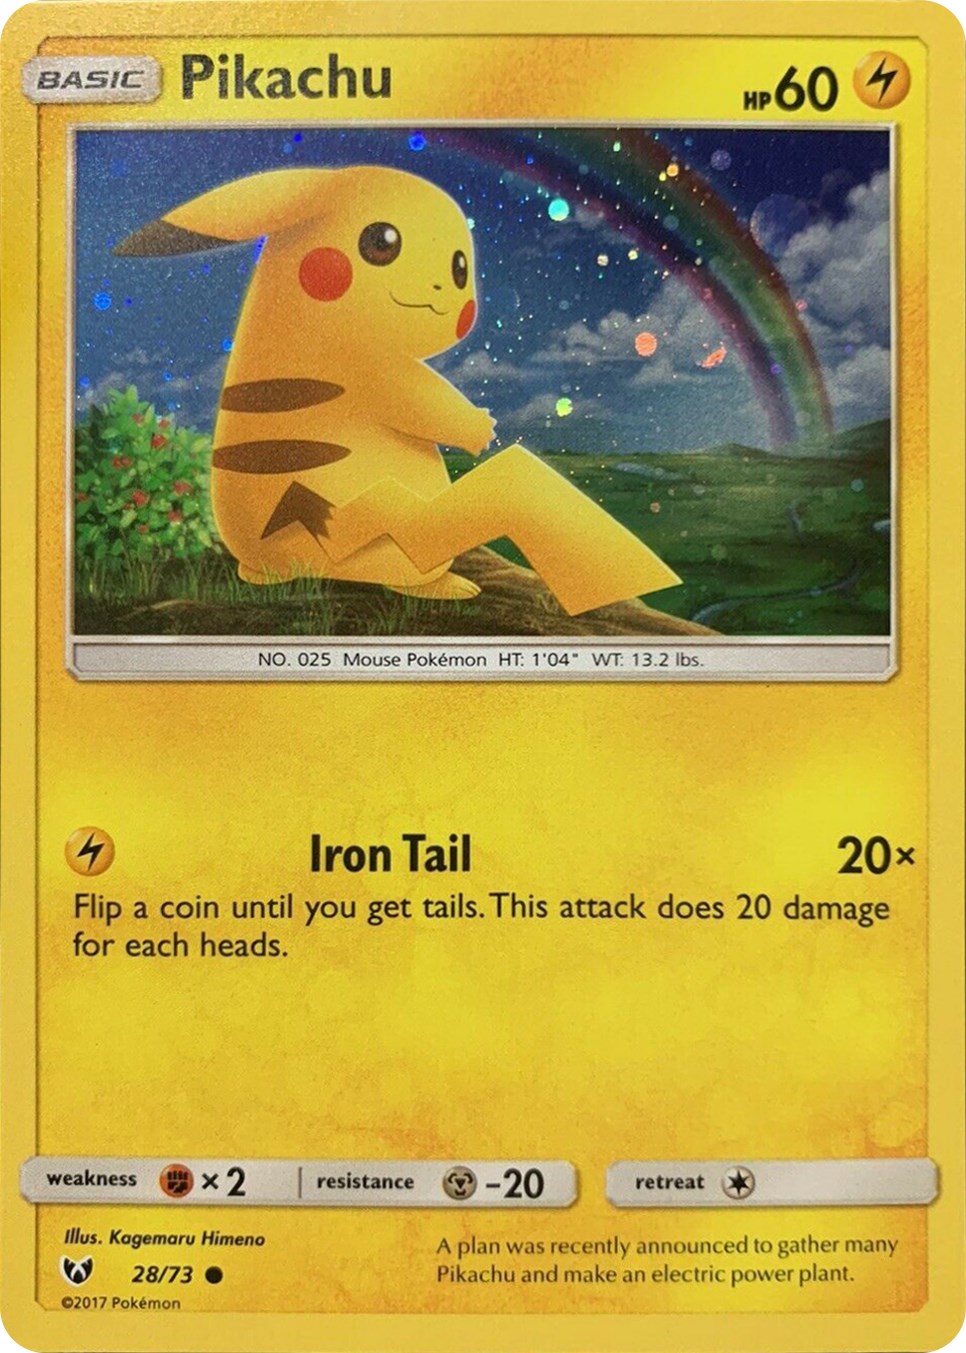 Check the actual price of your Pikachu SWSH234 Pokemon card